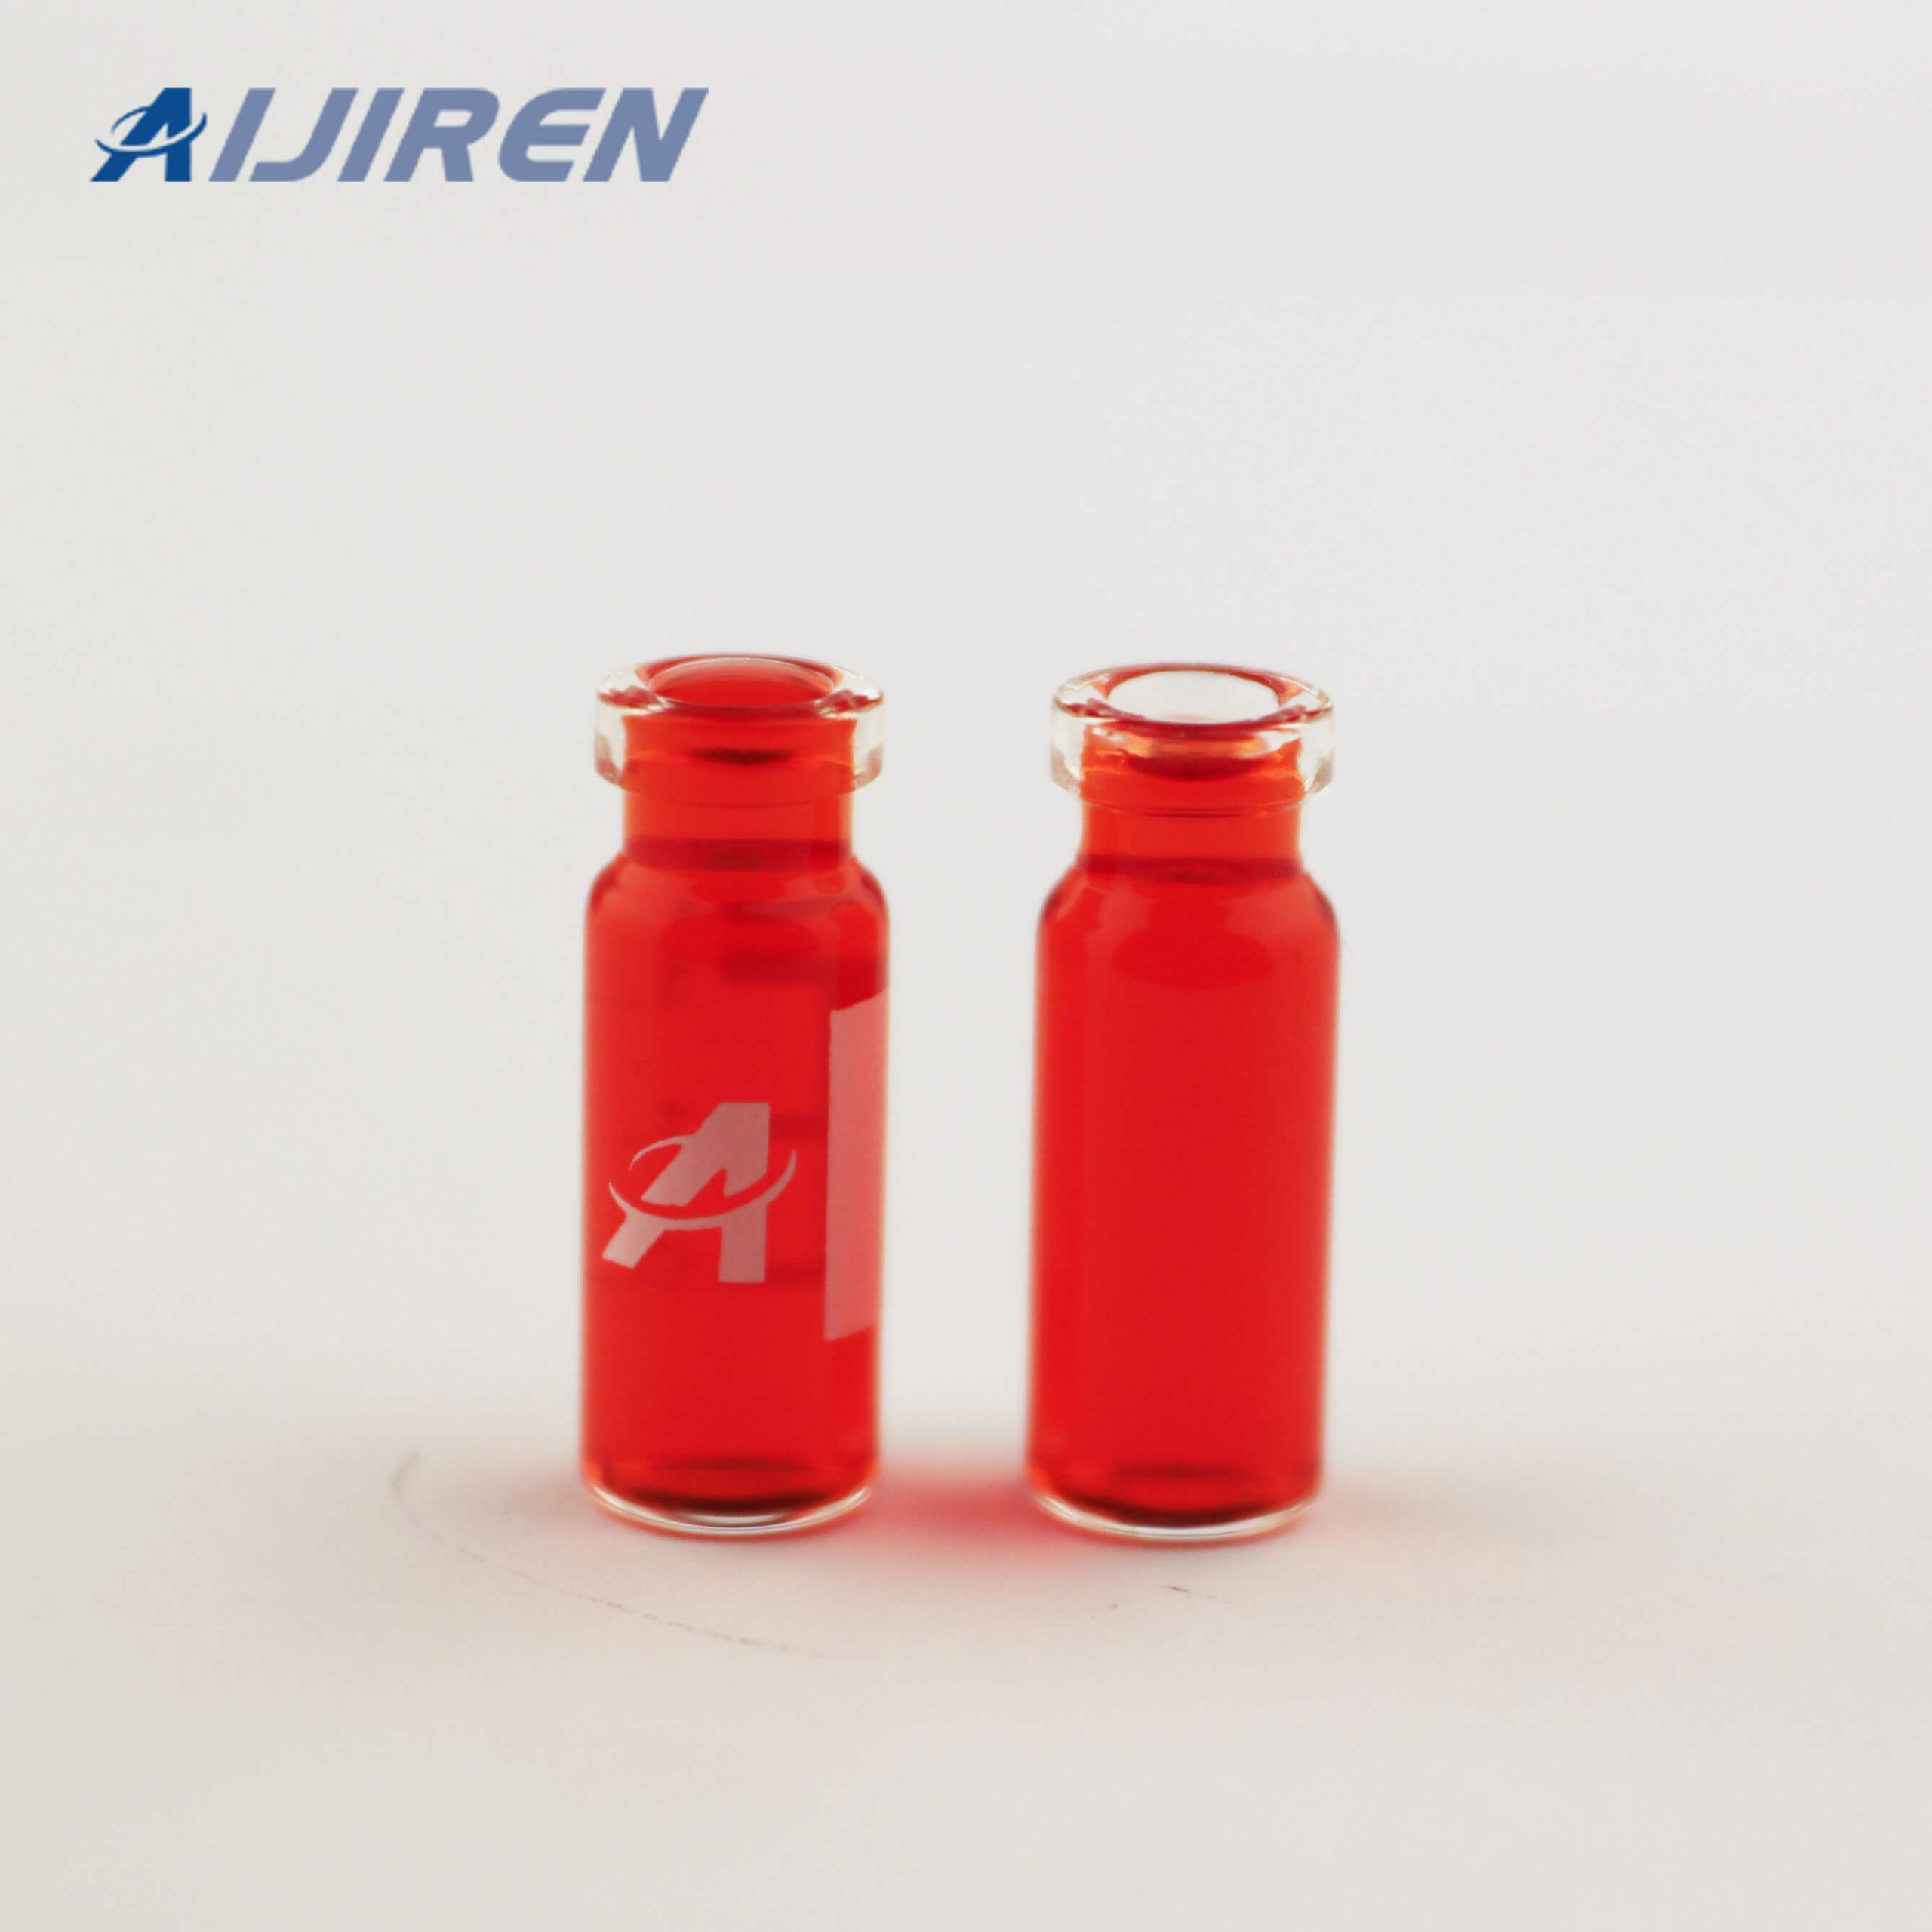 2ml Clear Glass Vial for HPLC for THERMO FISHER